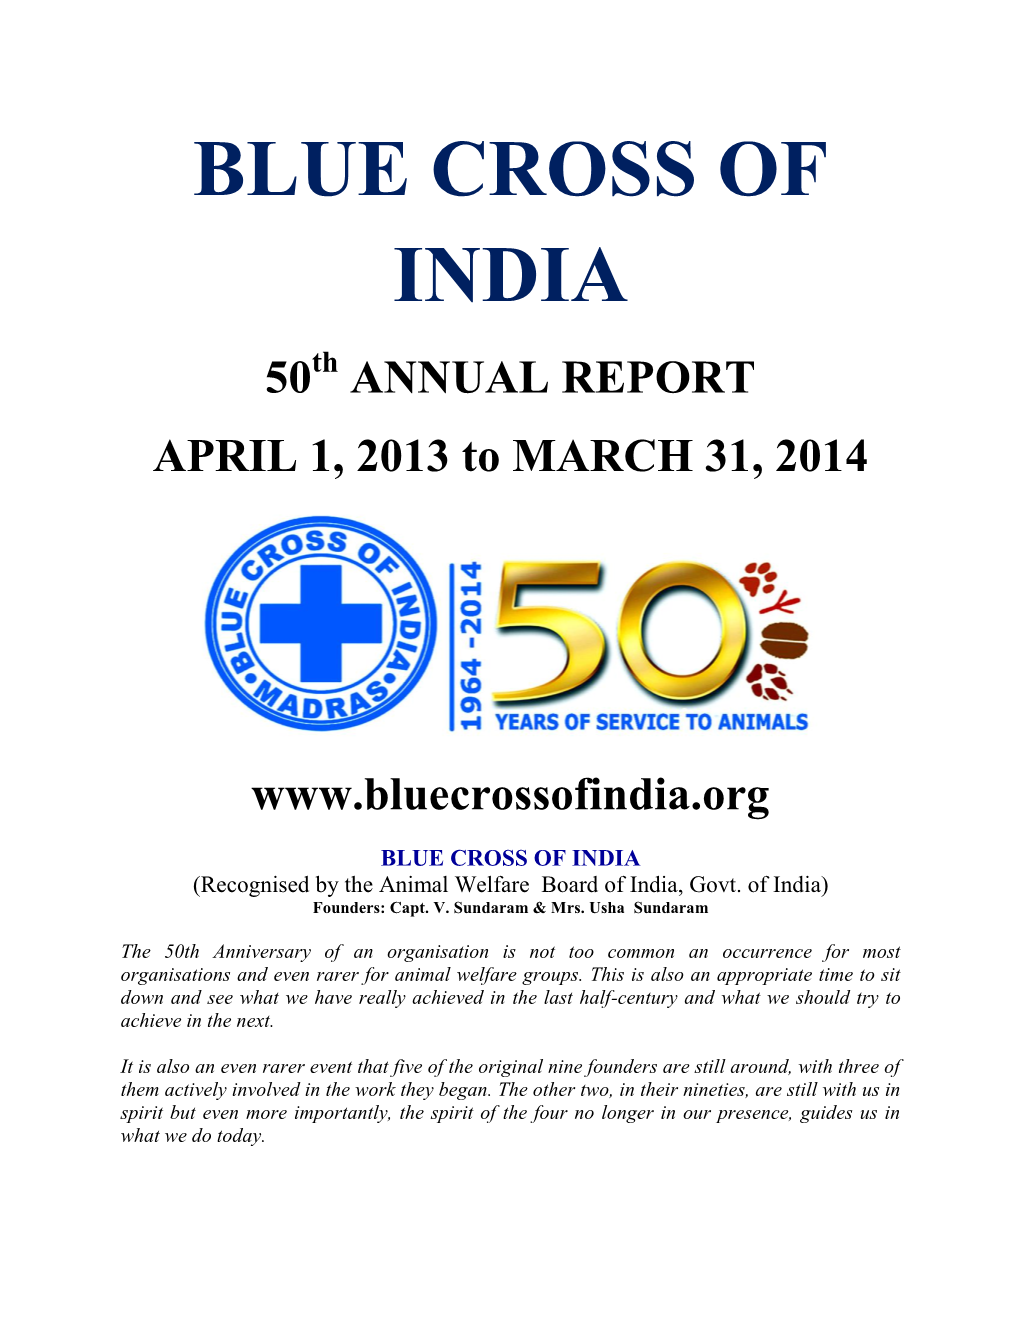 BLUE CROSS of INDIA (Recognised by the Animal Welfare Board of India, Govt